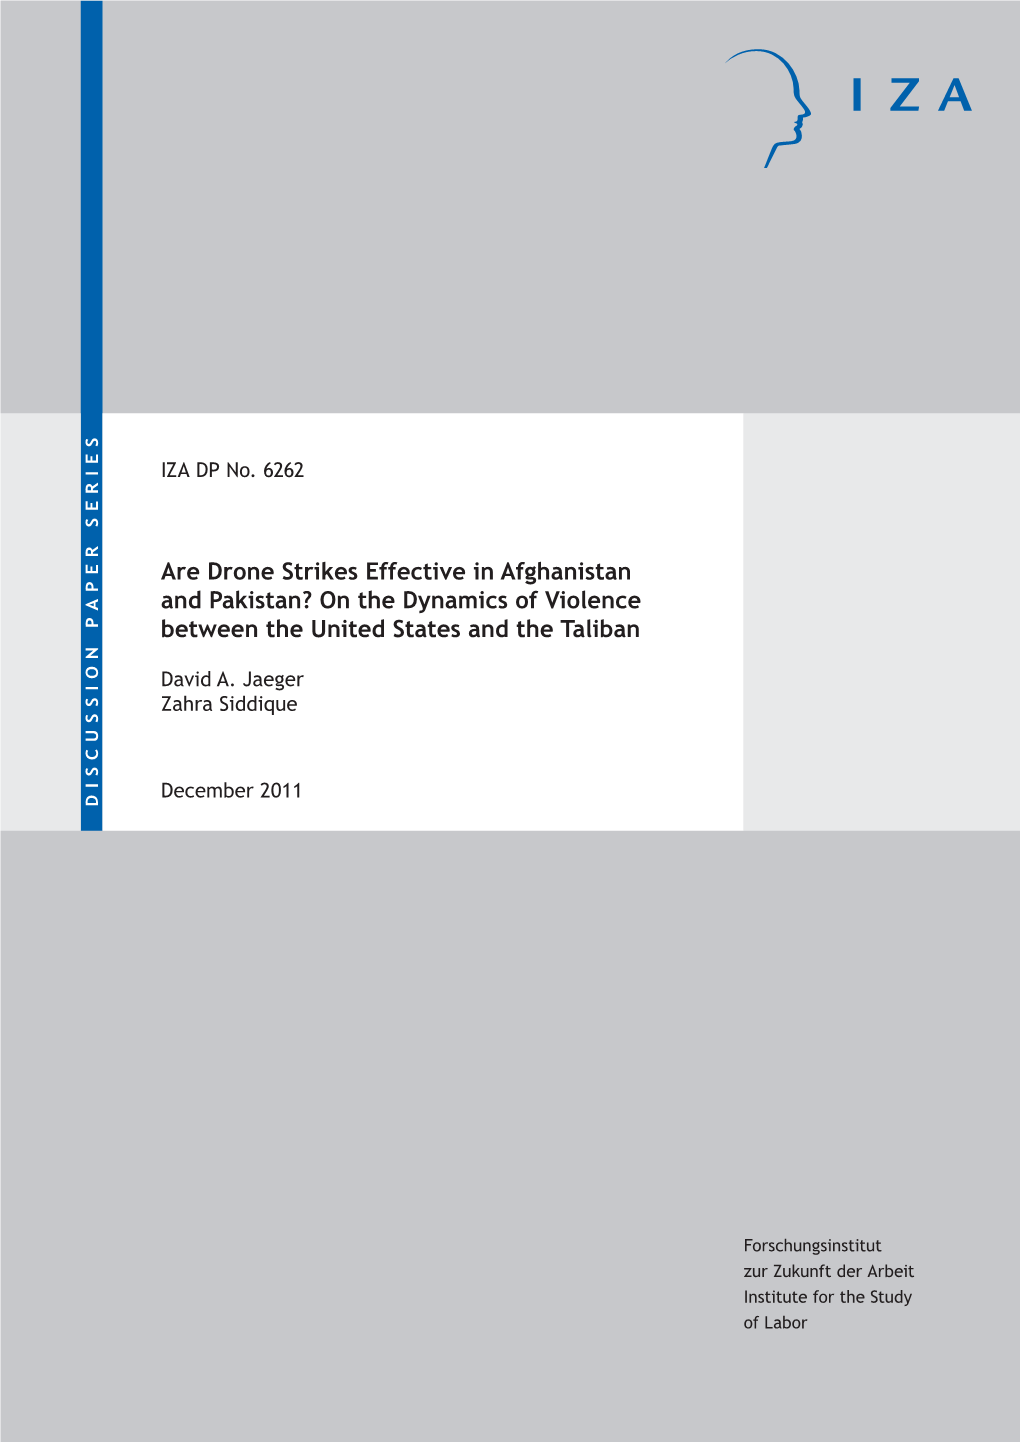 Are Drone Strikes Effective in Afghanistan and Pakistan? on the Dynamics of Violence Between the United States and the Taliban